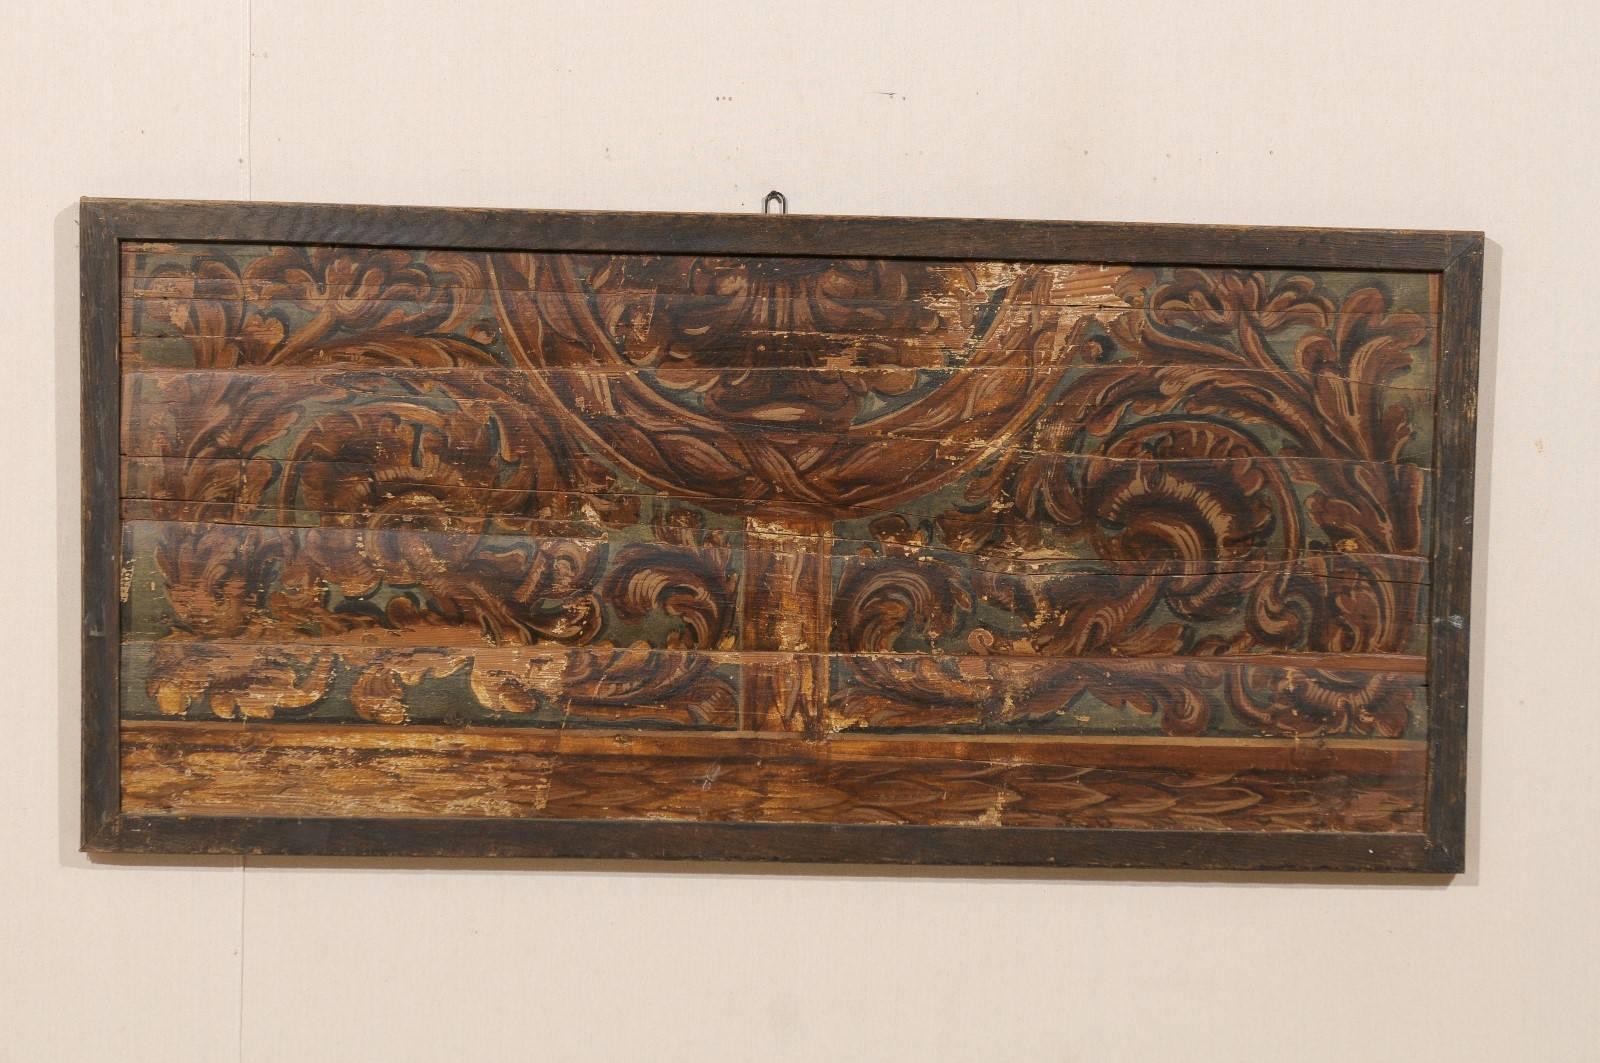 An Italian 18th century rectangular ceiling panel re-purposed into a wall decoration. This large size Italian richly painted wood ceiling panel features a décor of rinceaux / foliage. This piece is painted with rich, warm copper-brown tones. It